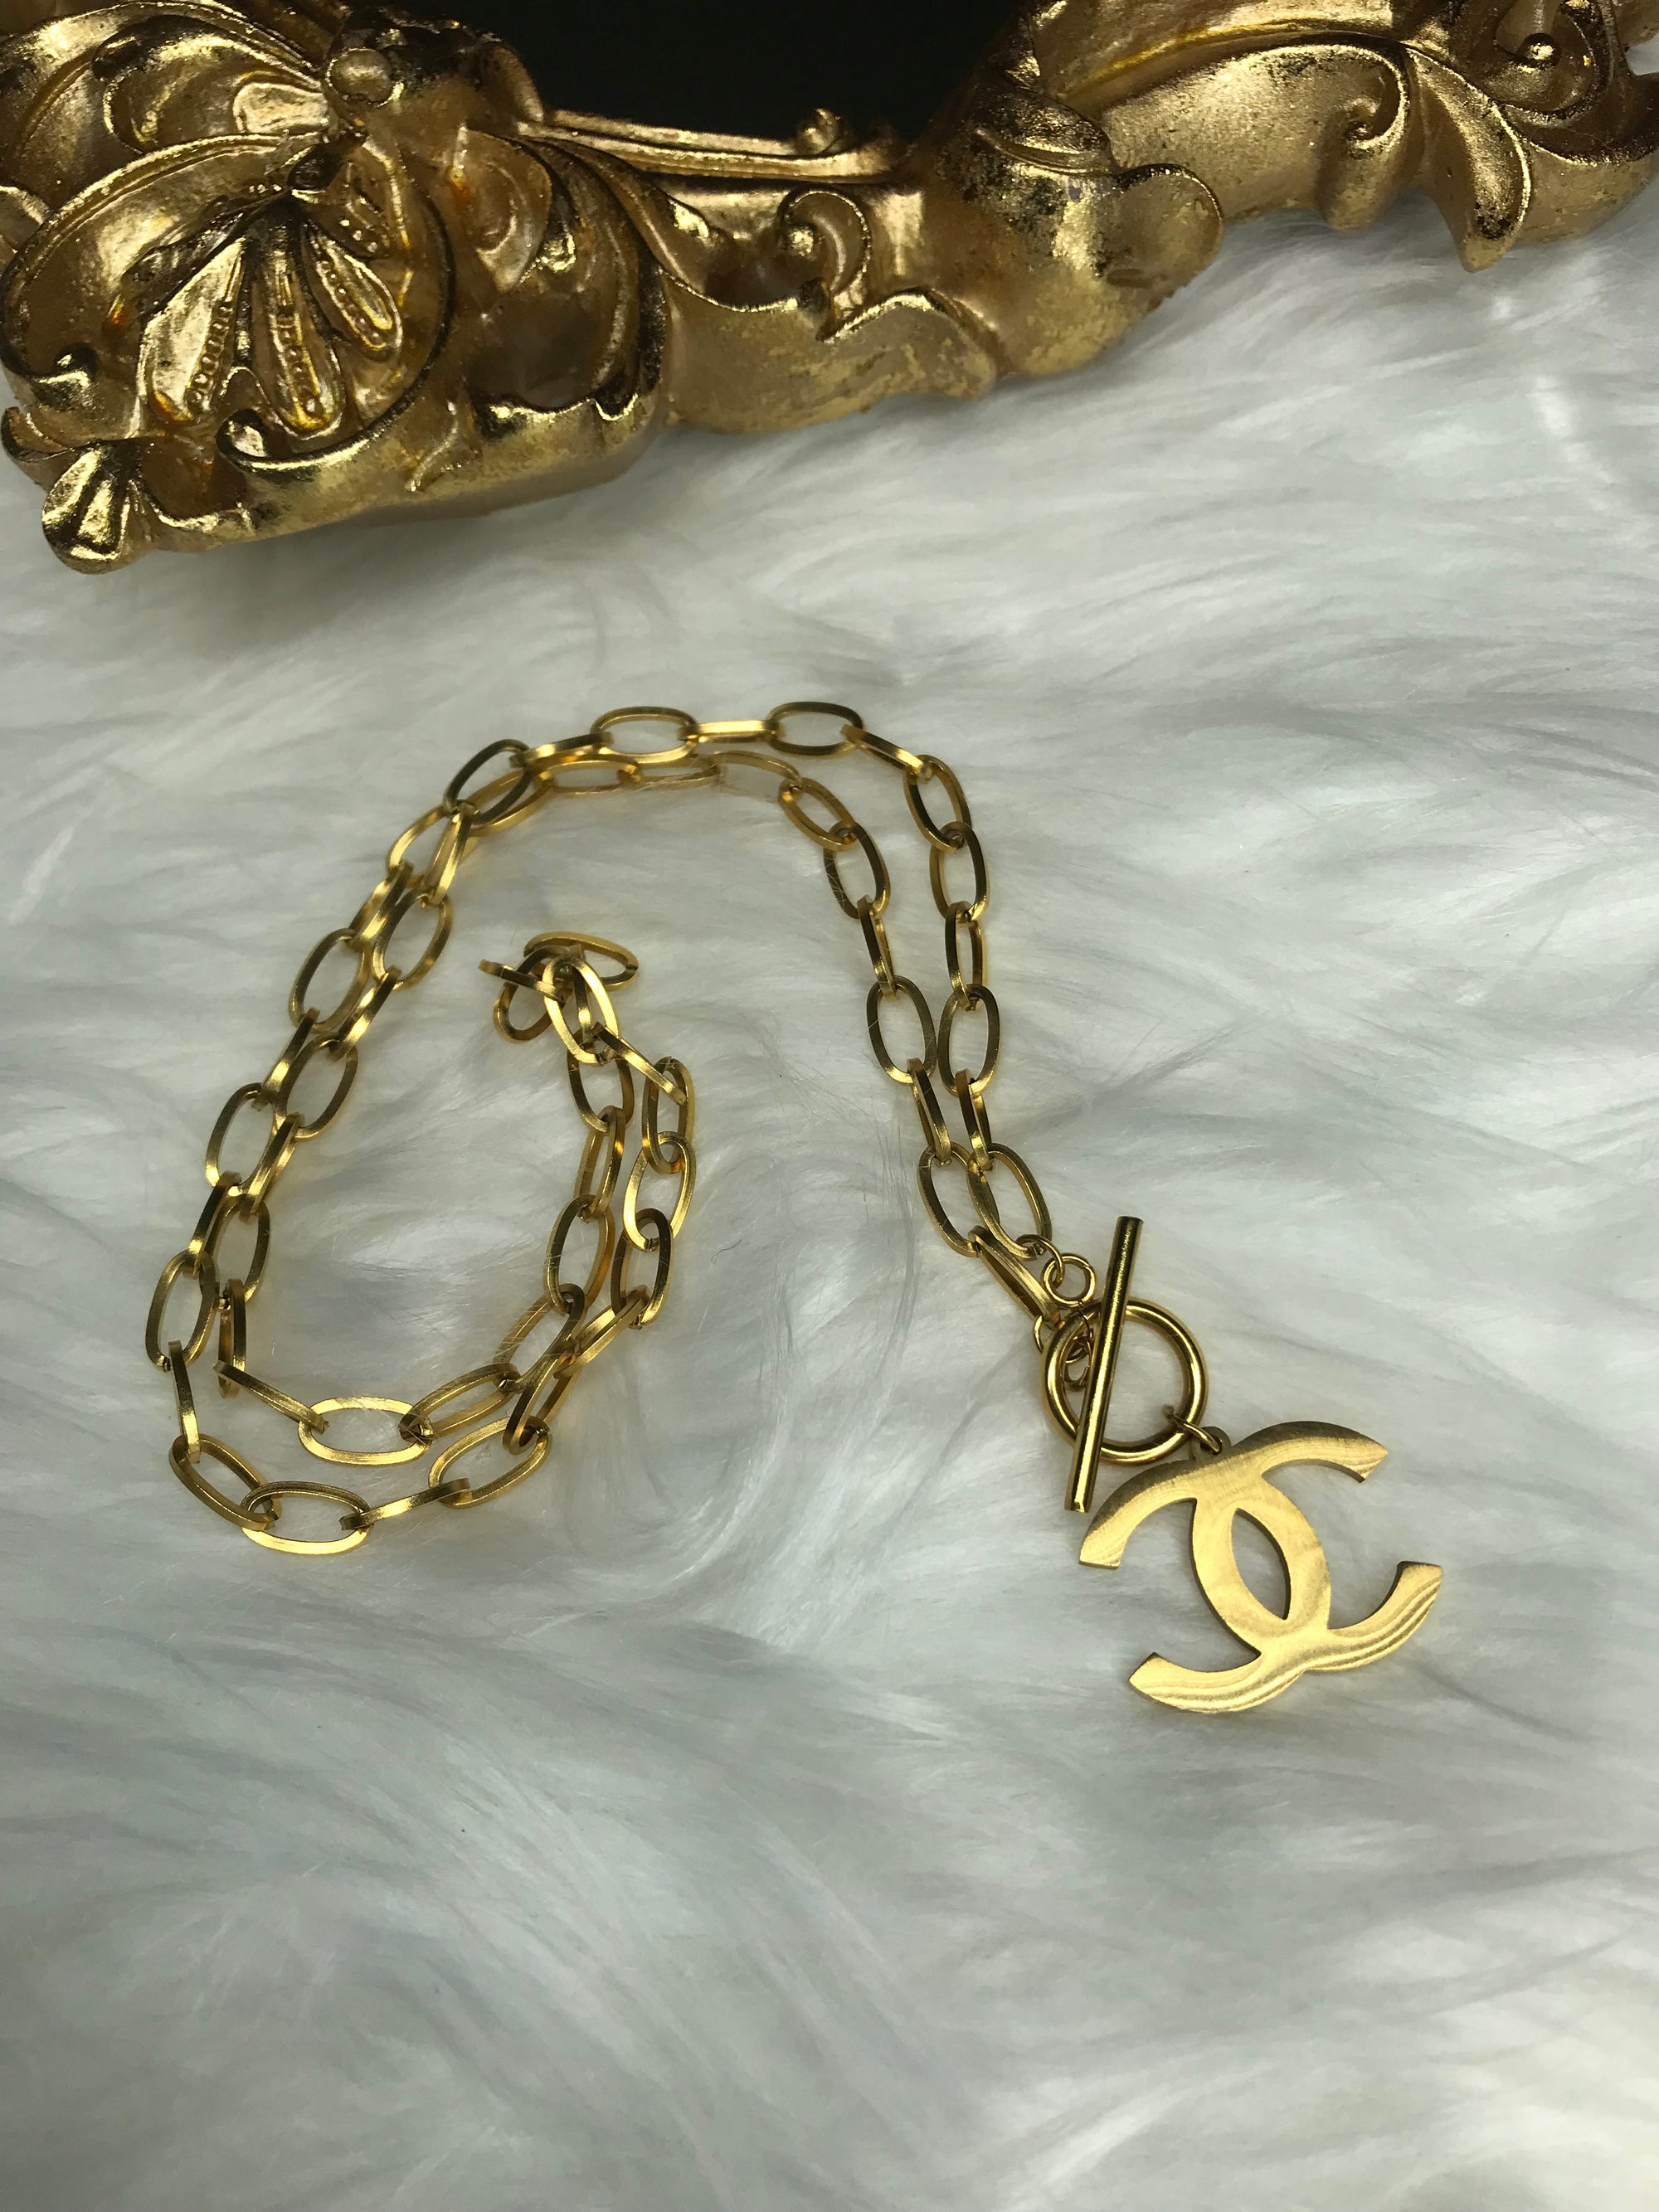 Chanel - Vintage Simple Small CC Logo Pendant Necklace  Vintage chanel  jewelry, Chanel jewelry, Chanel jewelry necklace